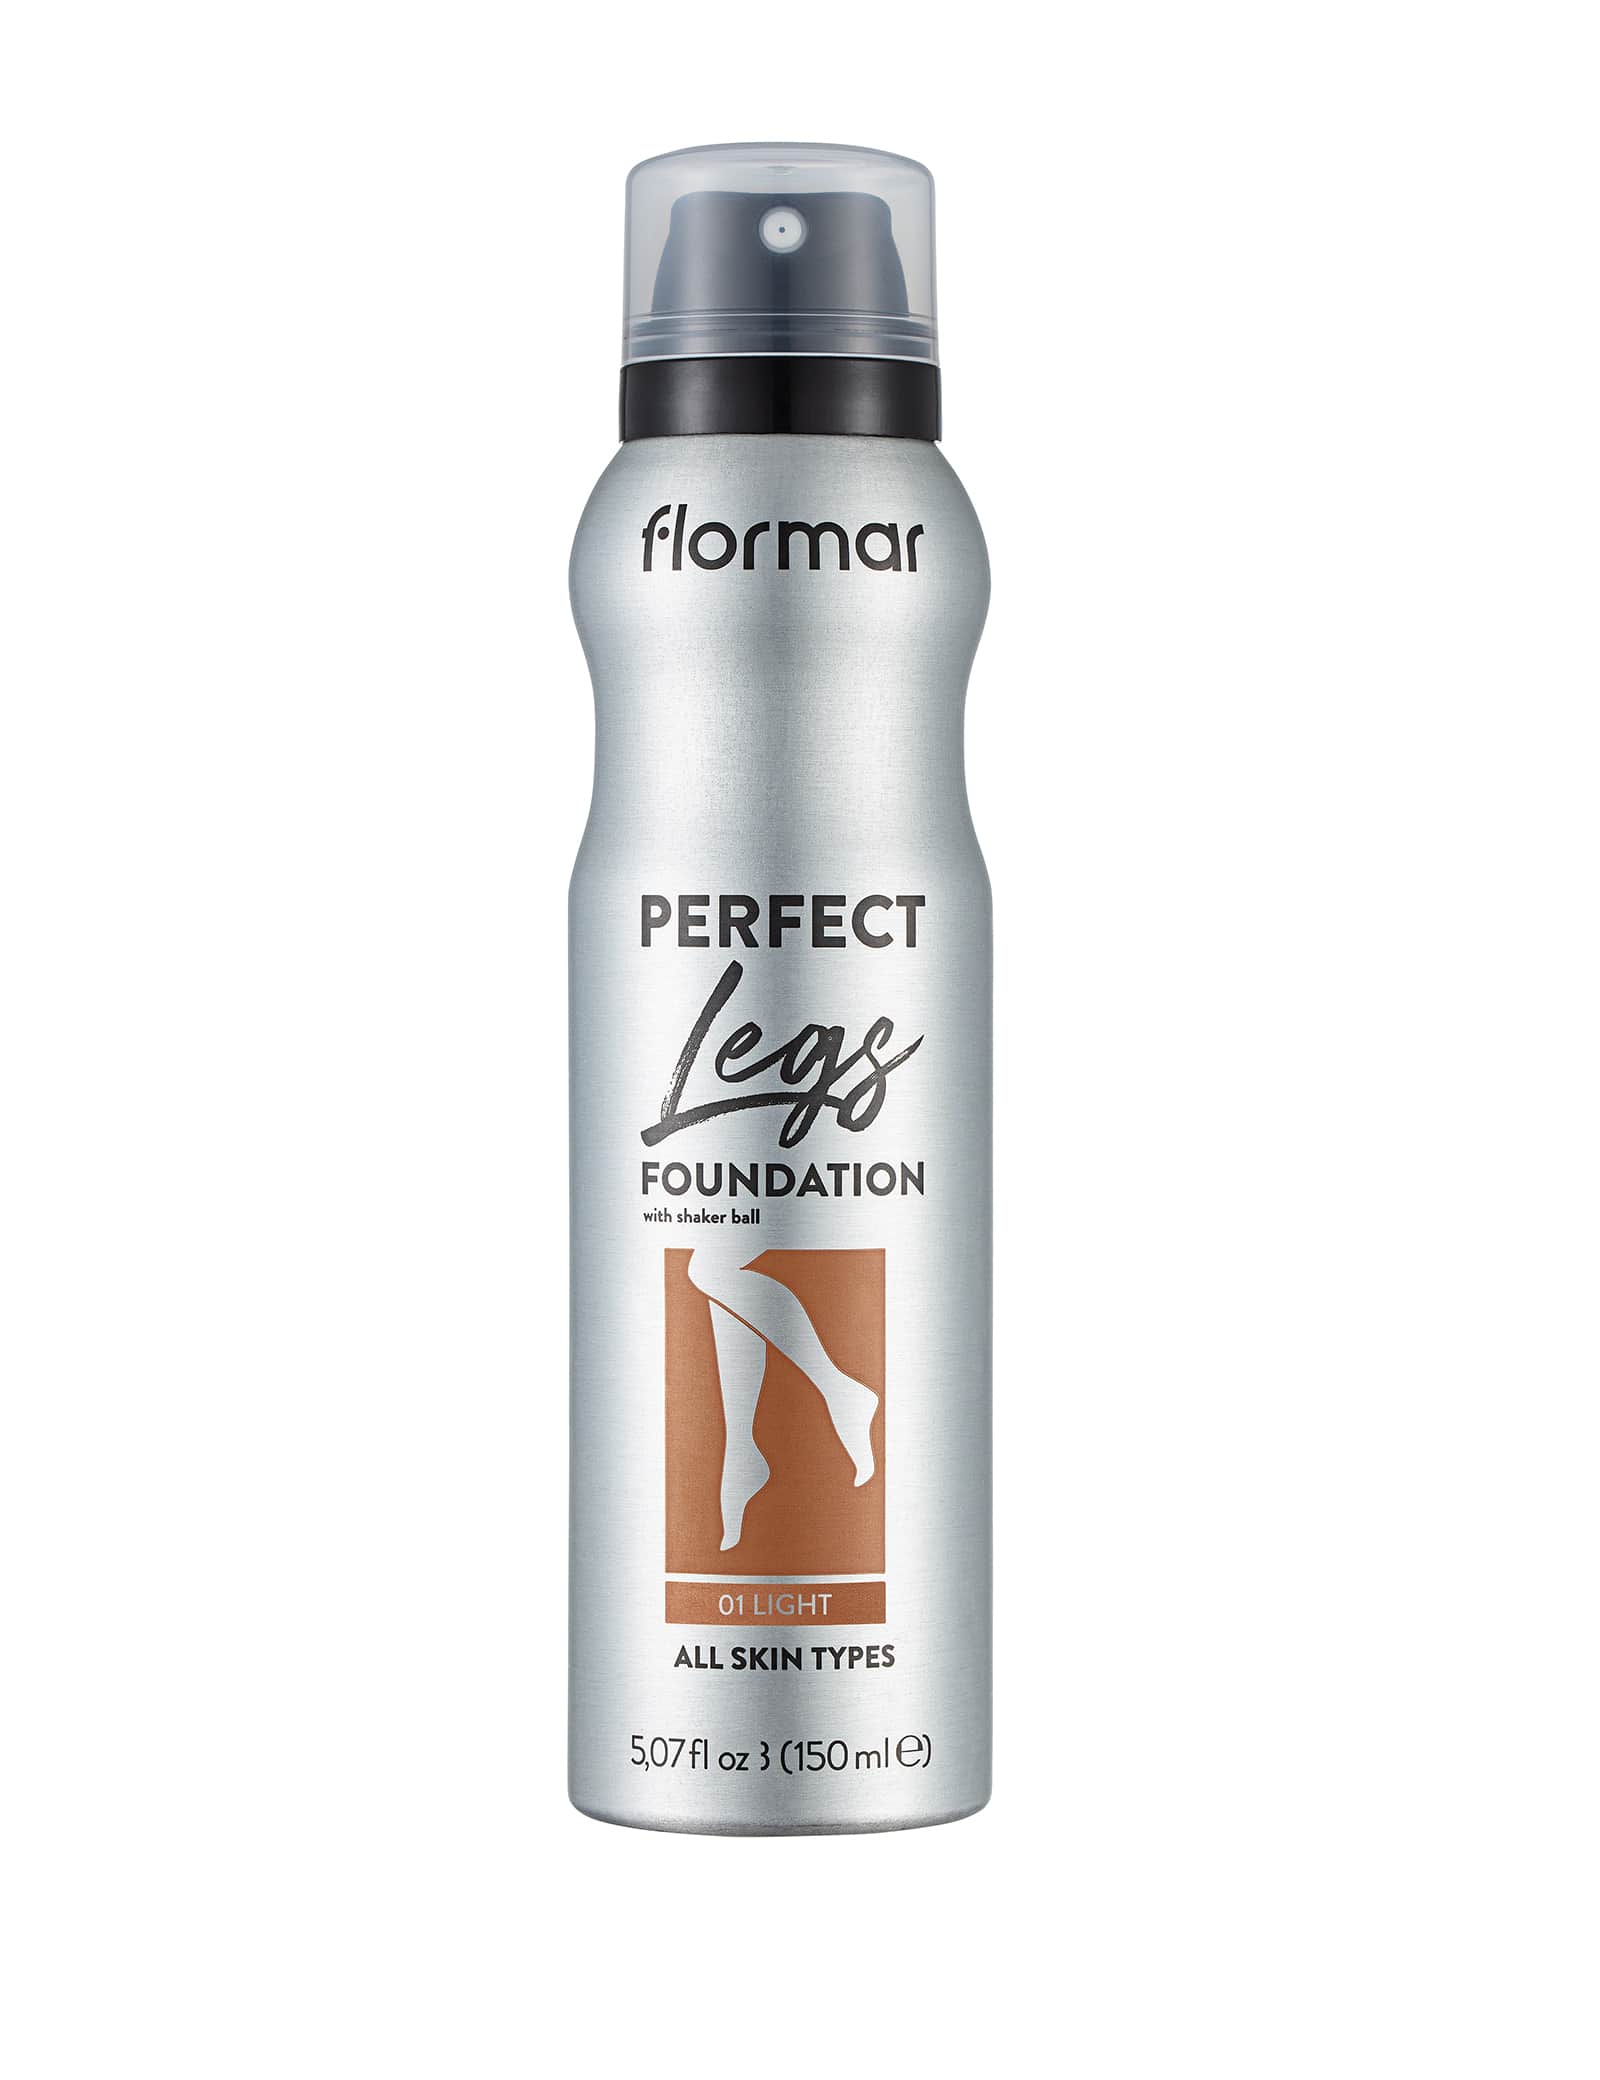 Flormar Perfect Foundation for Legs - 01